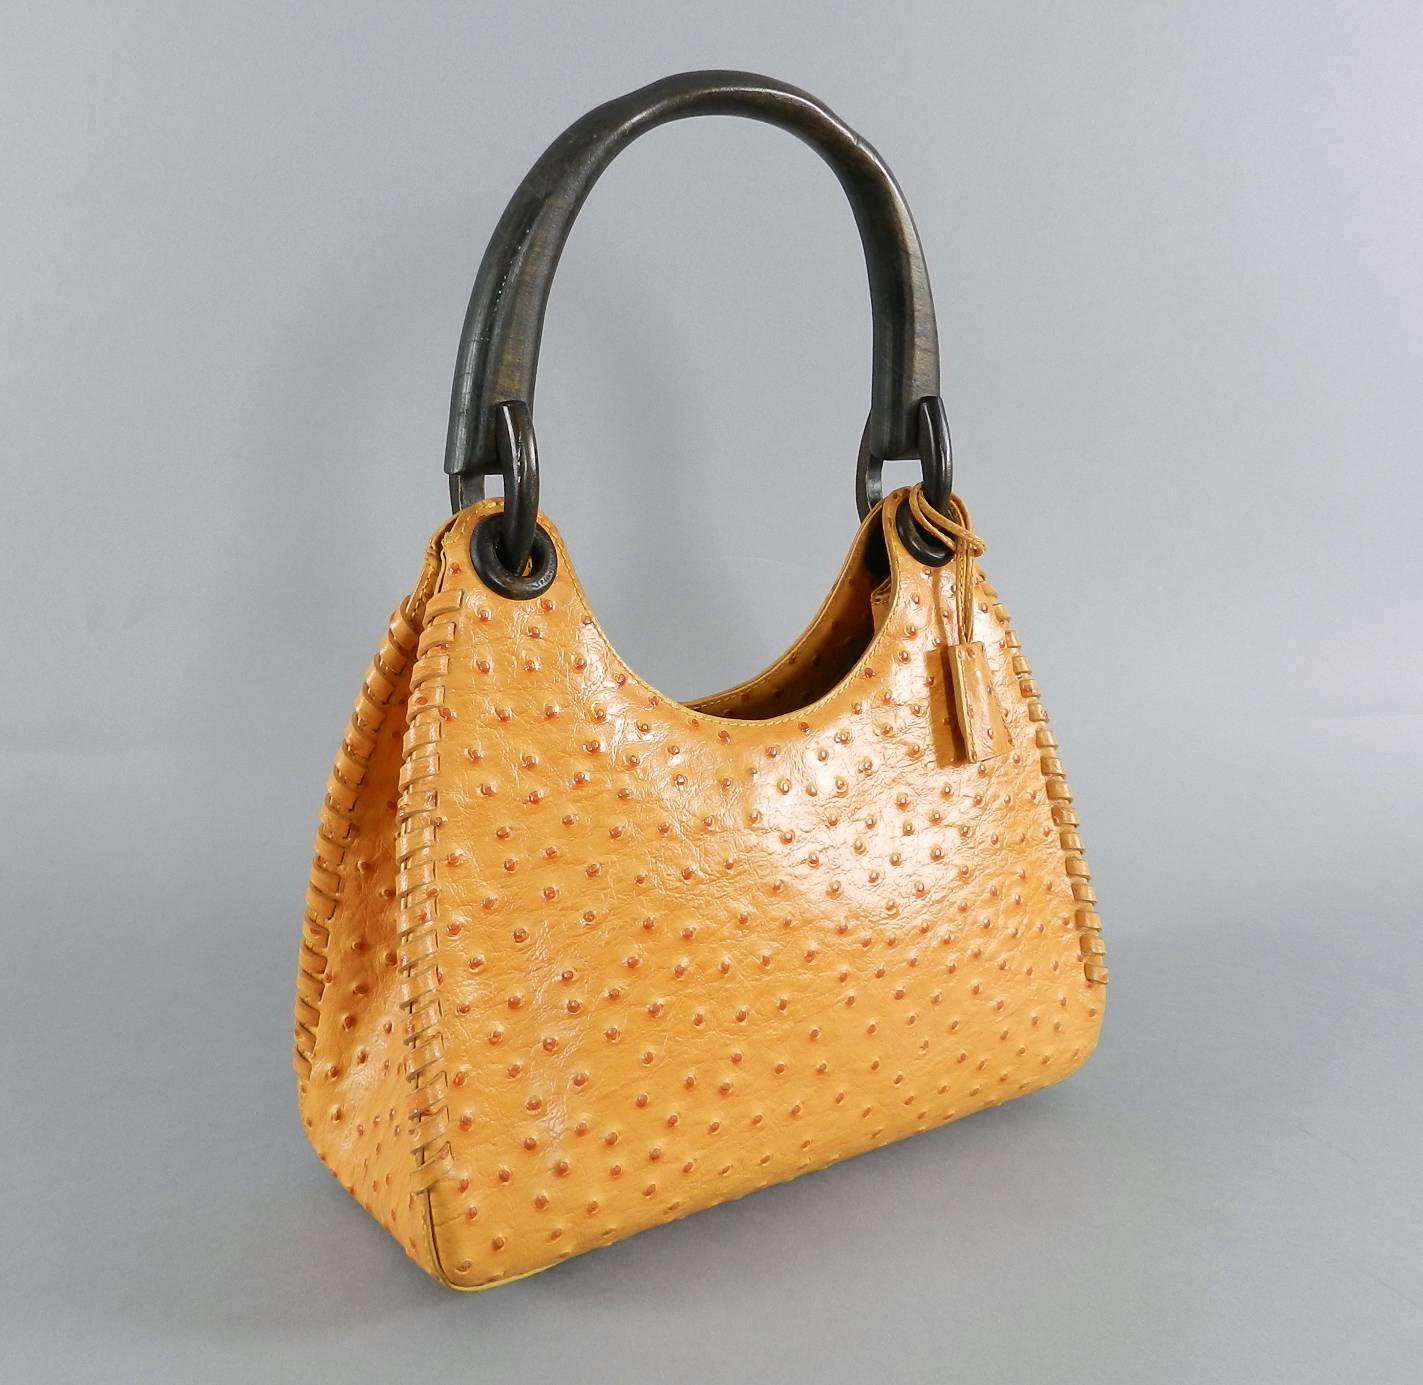 Gucci Ostrich Whipstitch Bag with Wood Handle.  Circa fall 2002 and designed by Tom Ford. Squash yellow / orange color with G jacquard black fabric lining. Excellent clean condition.  Body of bag measures 11.5